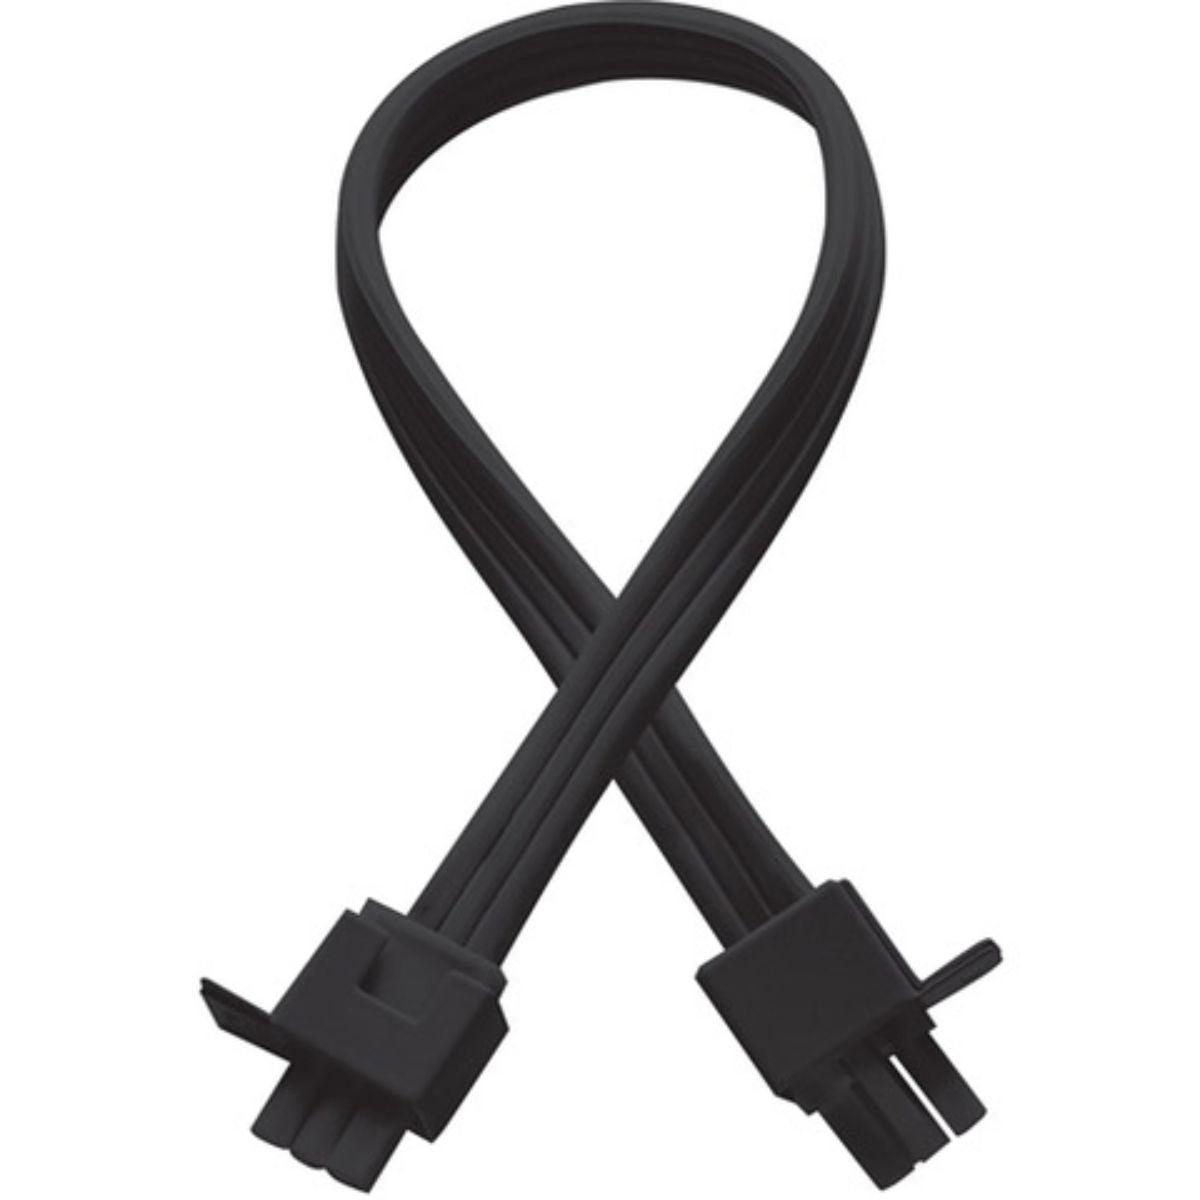 12in. Interconnect Cable For Undercabinet Lights, Black Finish